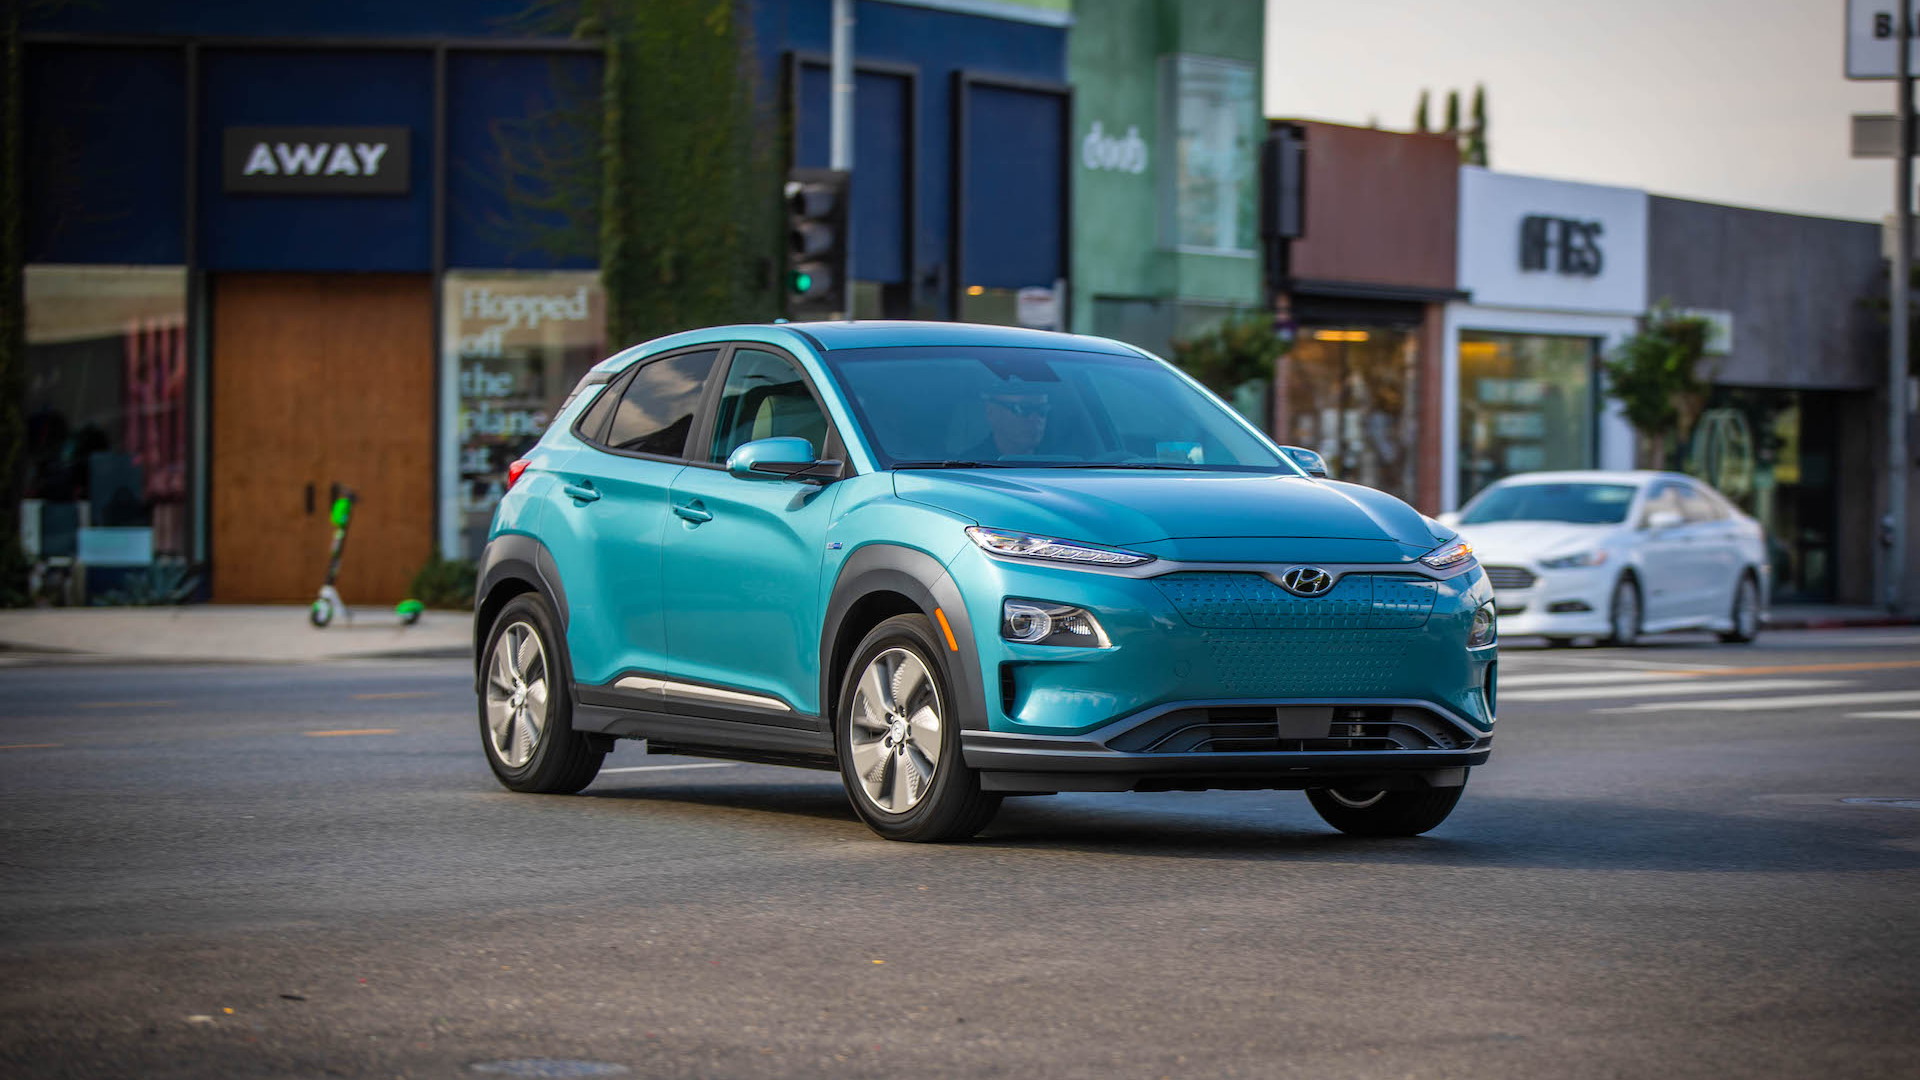 20 Hyundai Kona Electric comes better equipped for cold snaps